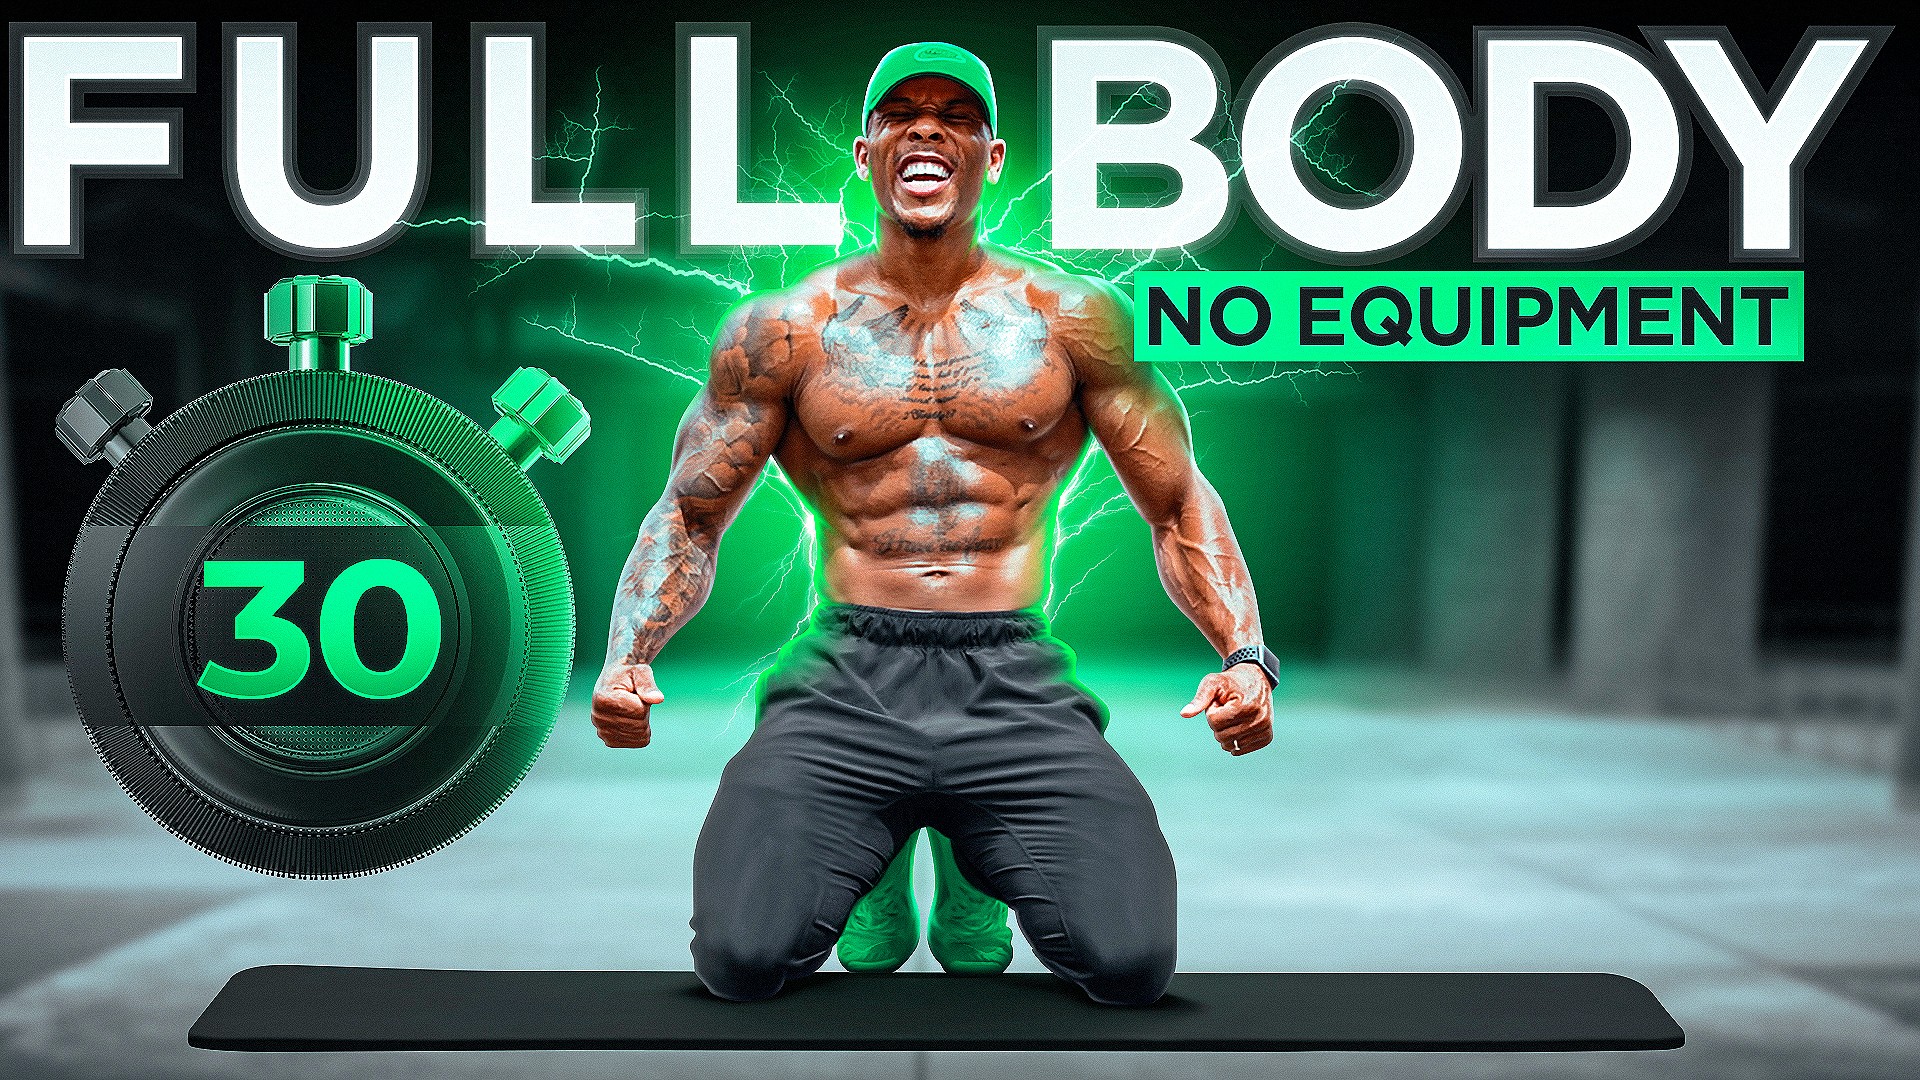 Bully for You 2023, Fitness Influencer Darryl Williams Is Positive You Can  Get More Fit., Best of Dallas® 2020, Best Restaurants, Bars, Clubs, Music  and Stores in Dallas